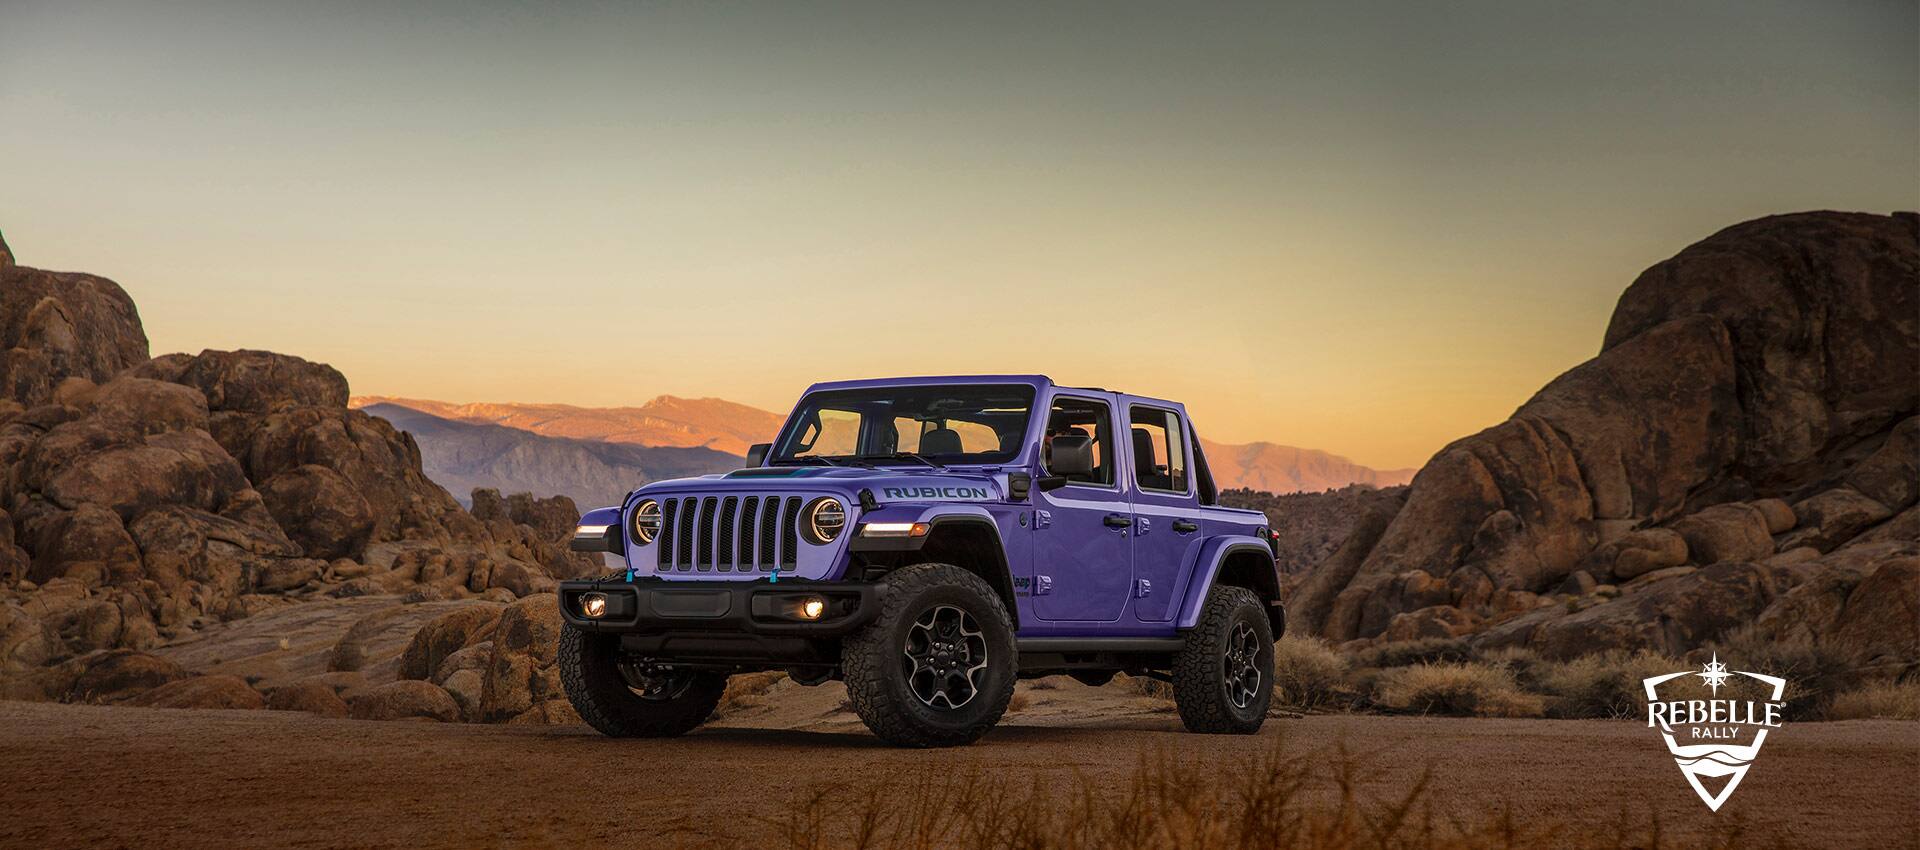 A 2023 Jeep Wrangler Rubicon 4xe parked on a clearing off-road beside rocky hills with mountains in the background at sunset. Rebelle Rally logo.